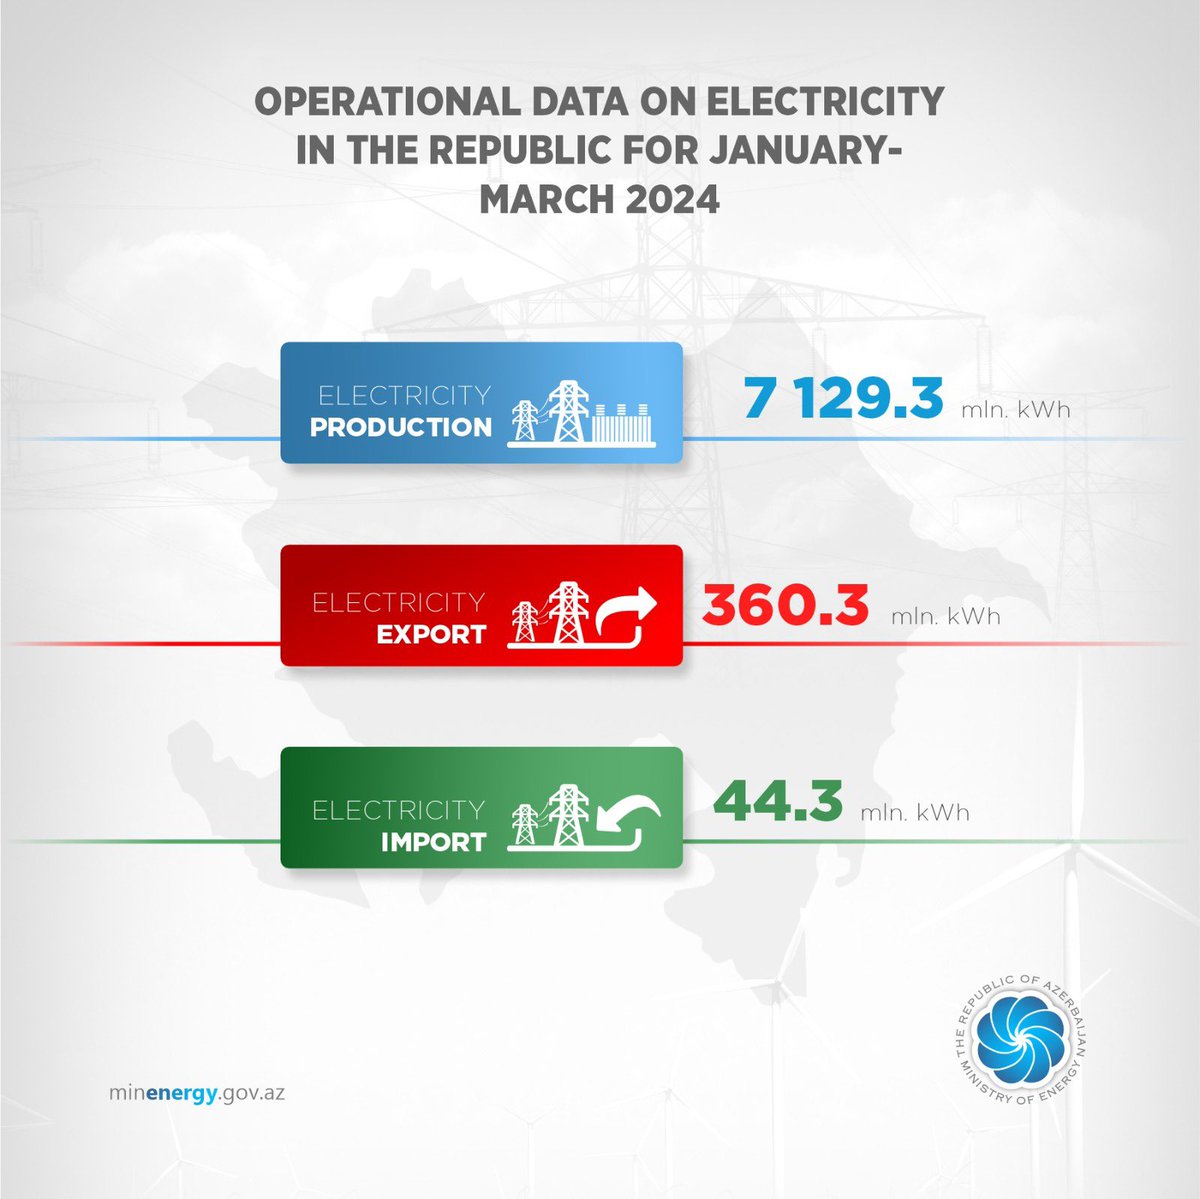 According to operational data for the first quarter of this year, electricity production was 7129.3 mln kWh, #exports to 360.3 million kWh and #imports to 44.3 million kWh.